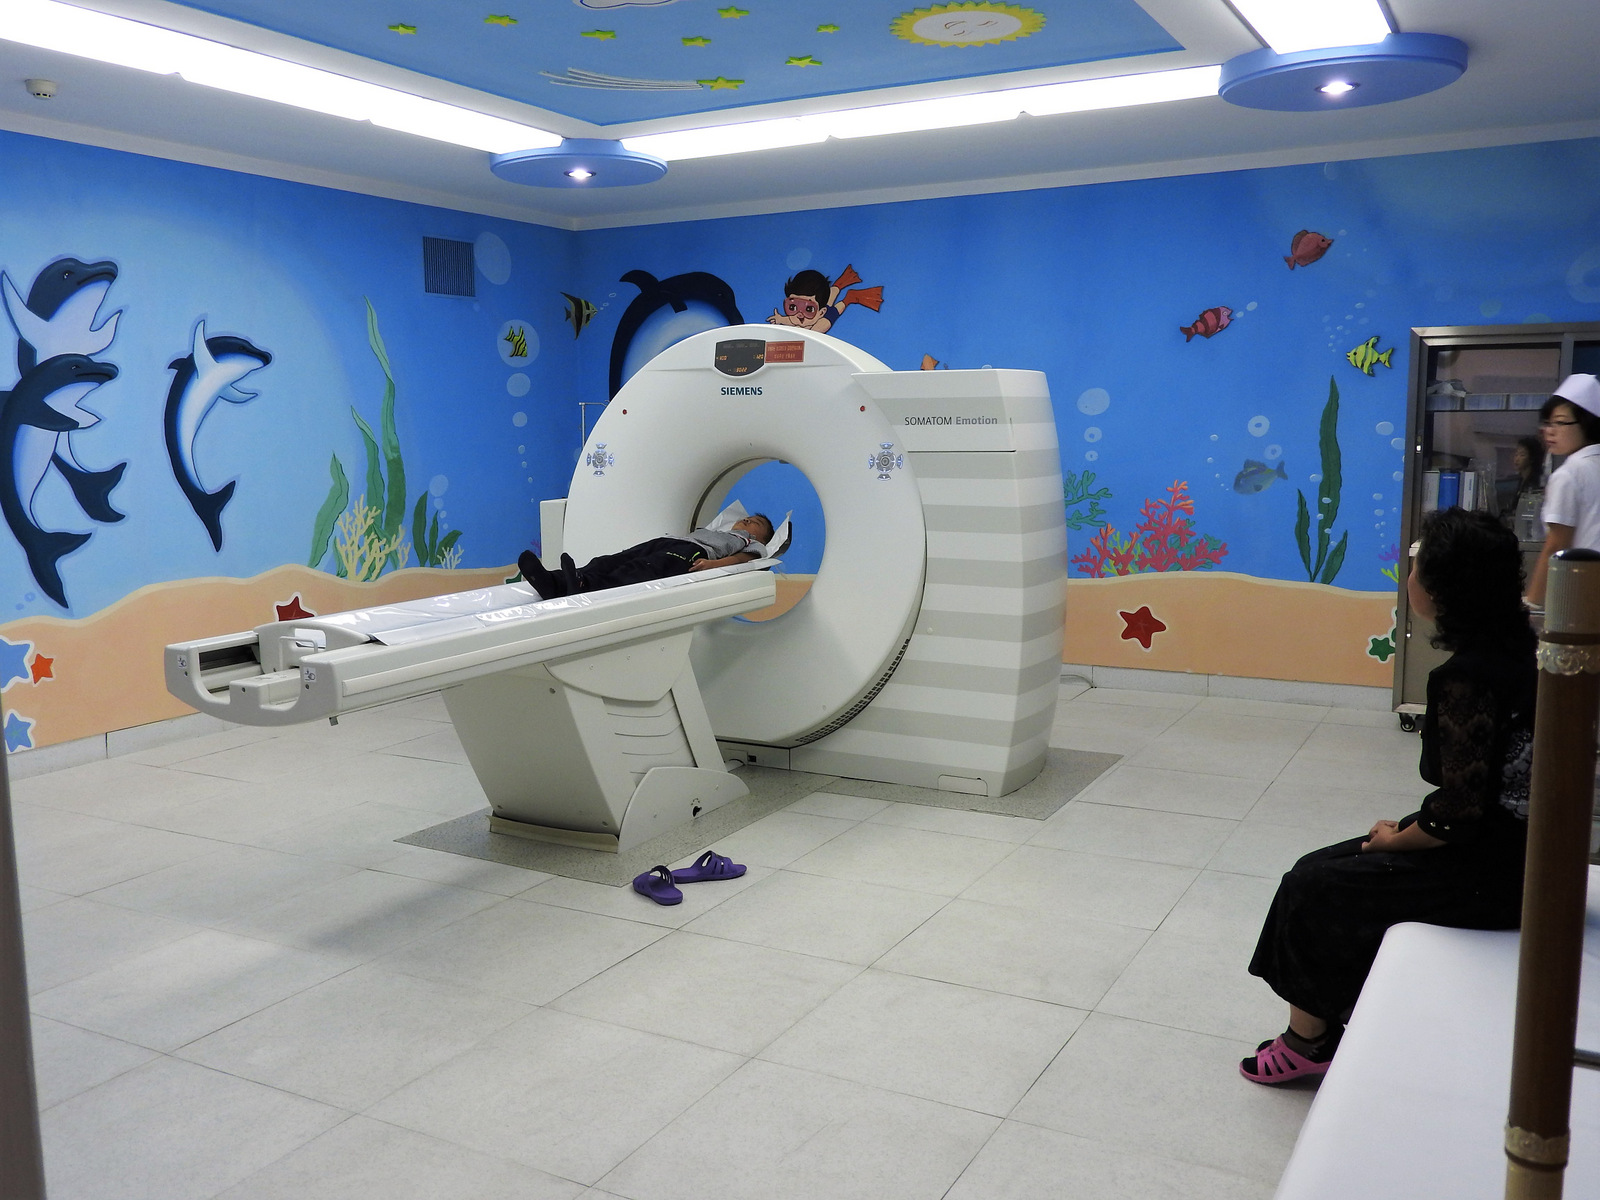 The Okryu Children's Hospital is a six-story, 300-bed facility across from Pyongyang's towering maternity hospital. U.S. sanctions on the DPRK prevent further entry of machines like the pictured CT scan. While defiantly proud of the health care system, Dr. Kim Un-Song spoke of her anger as a mother: “This is inhumane and against human rights. Medicine children need is under sanctions.”